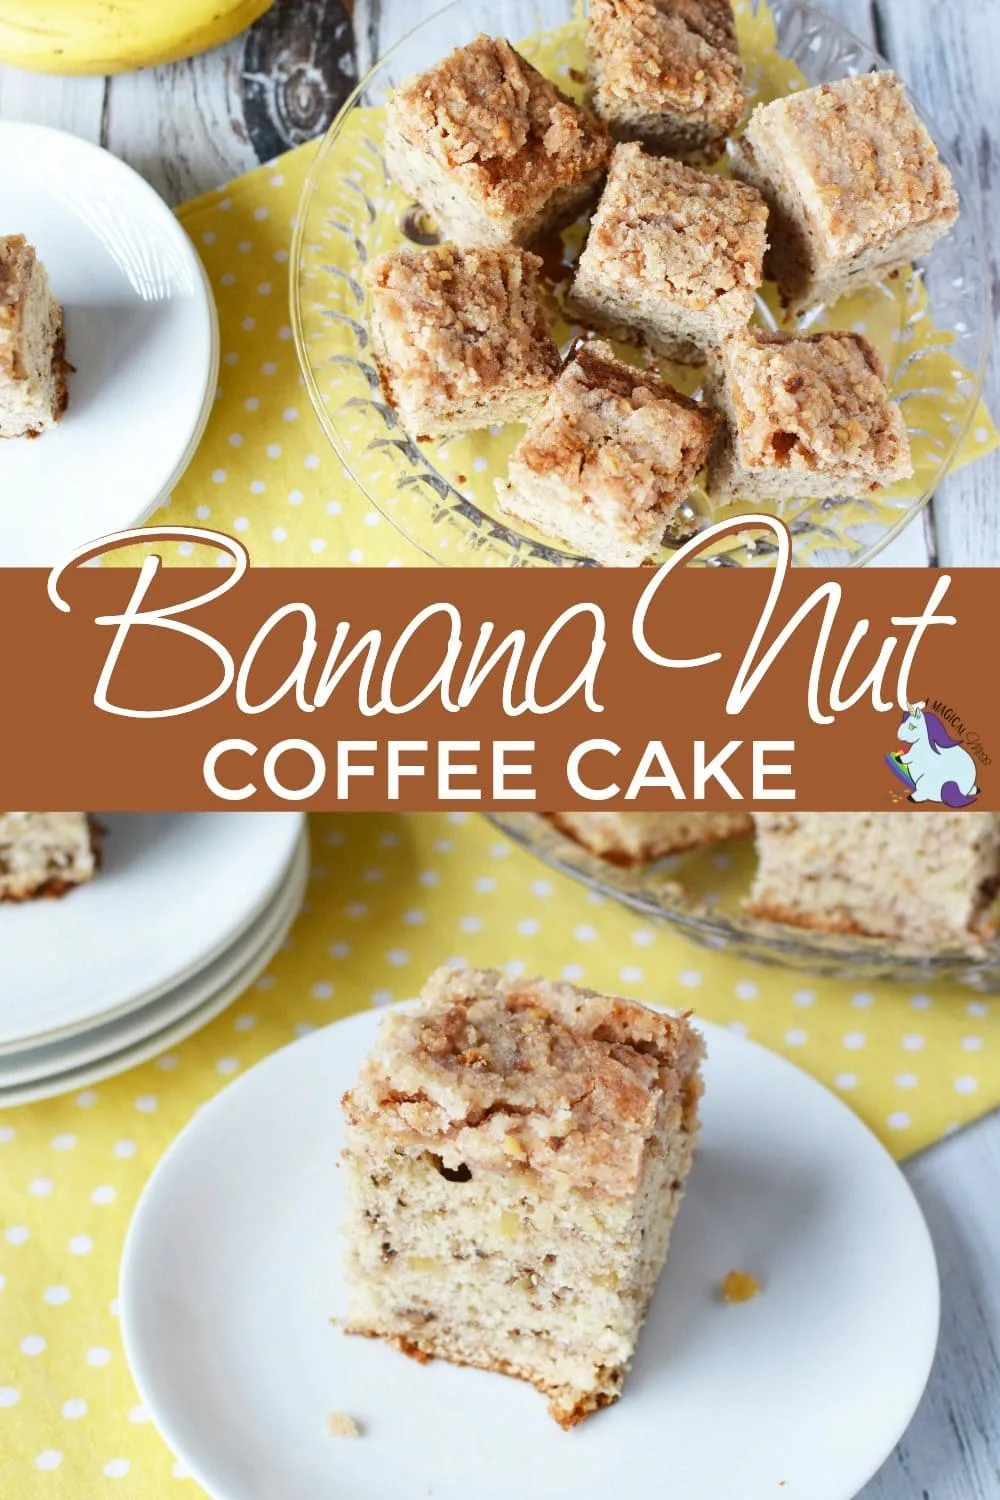 Slices of banana nut coffee cake on a plate.